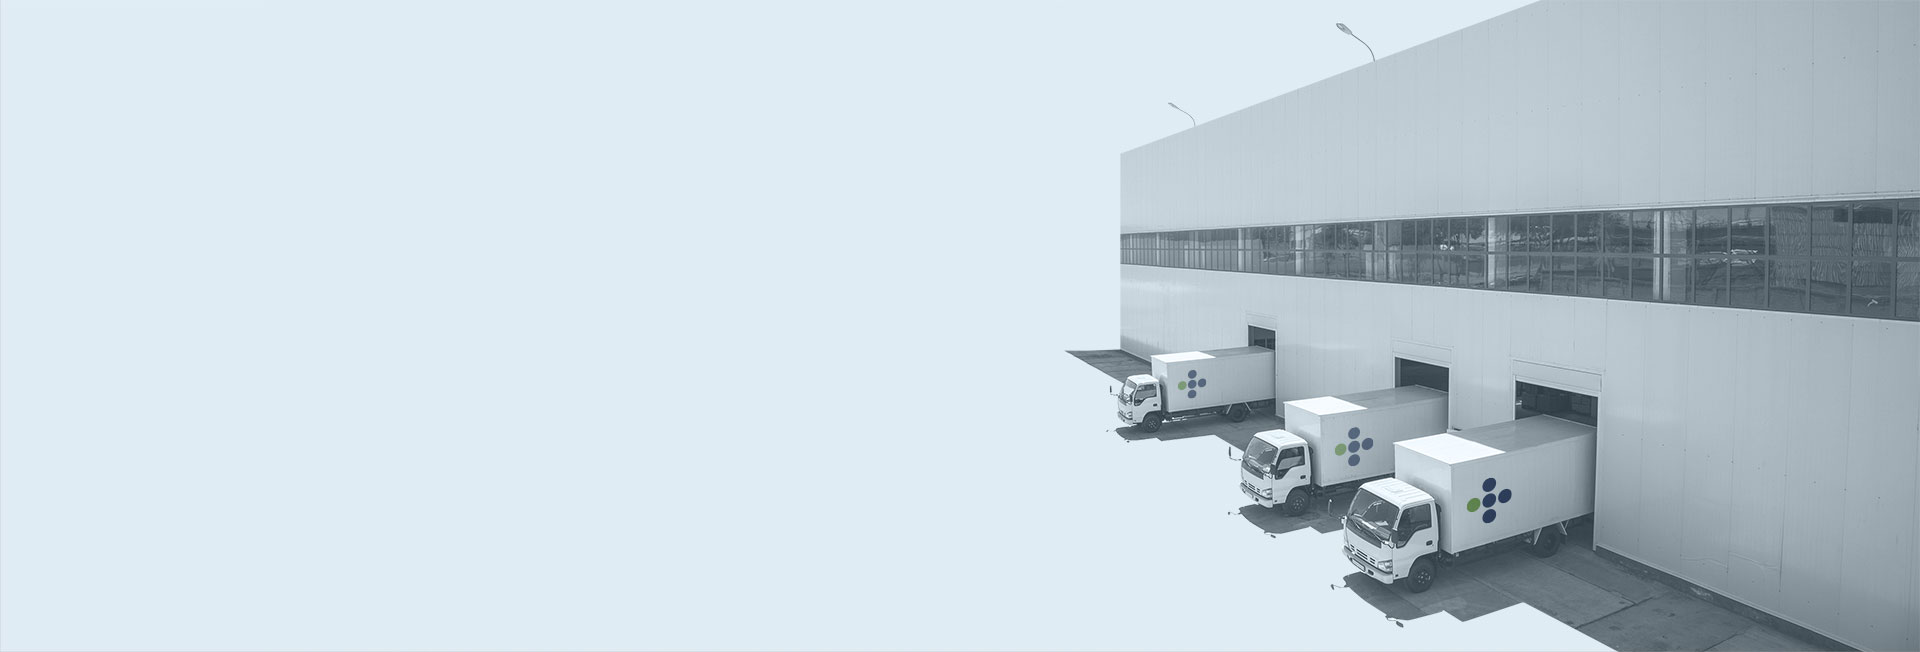 Background of a warehouse with trucks parked in loading bays with logo of S+C Partners, a full-service firm of chartered professional accountants